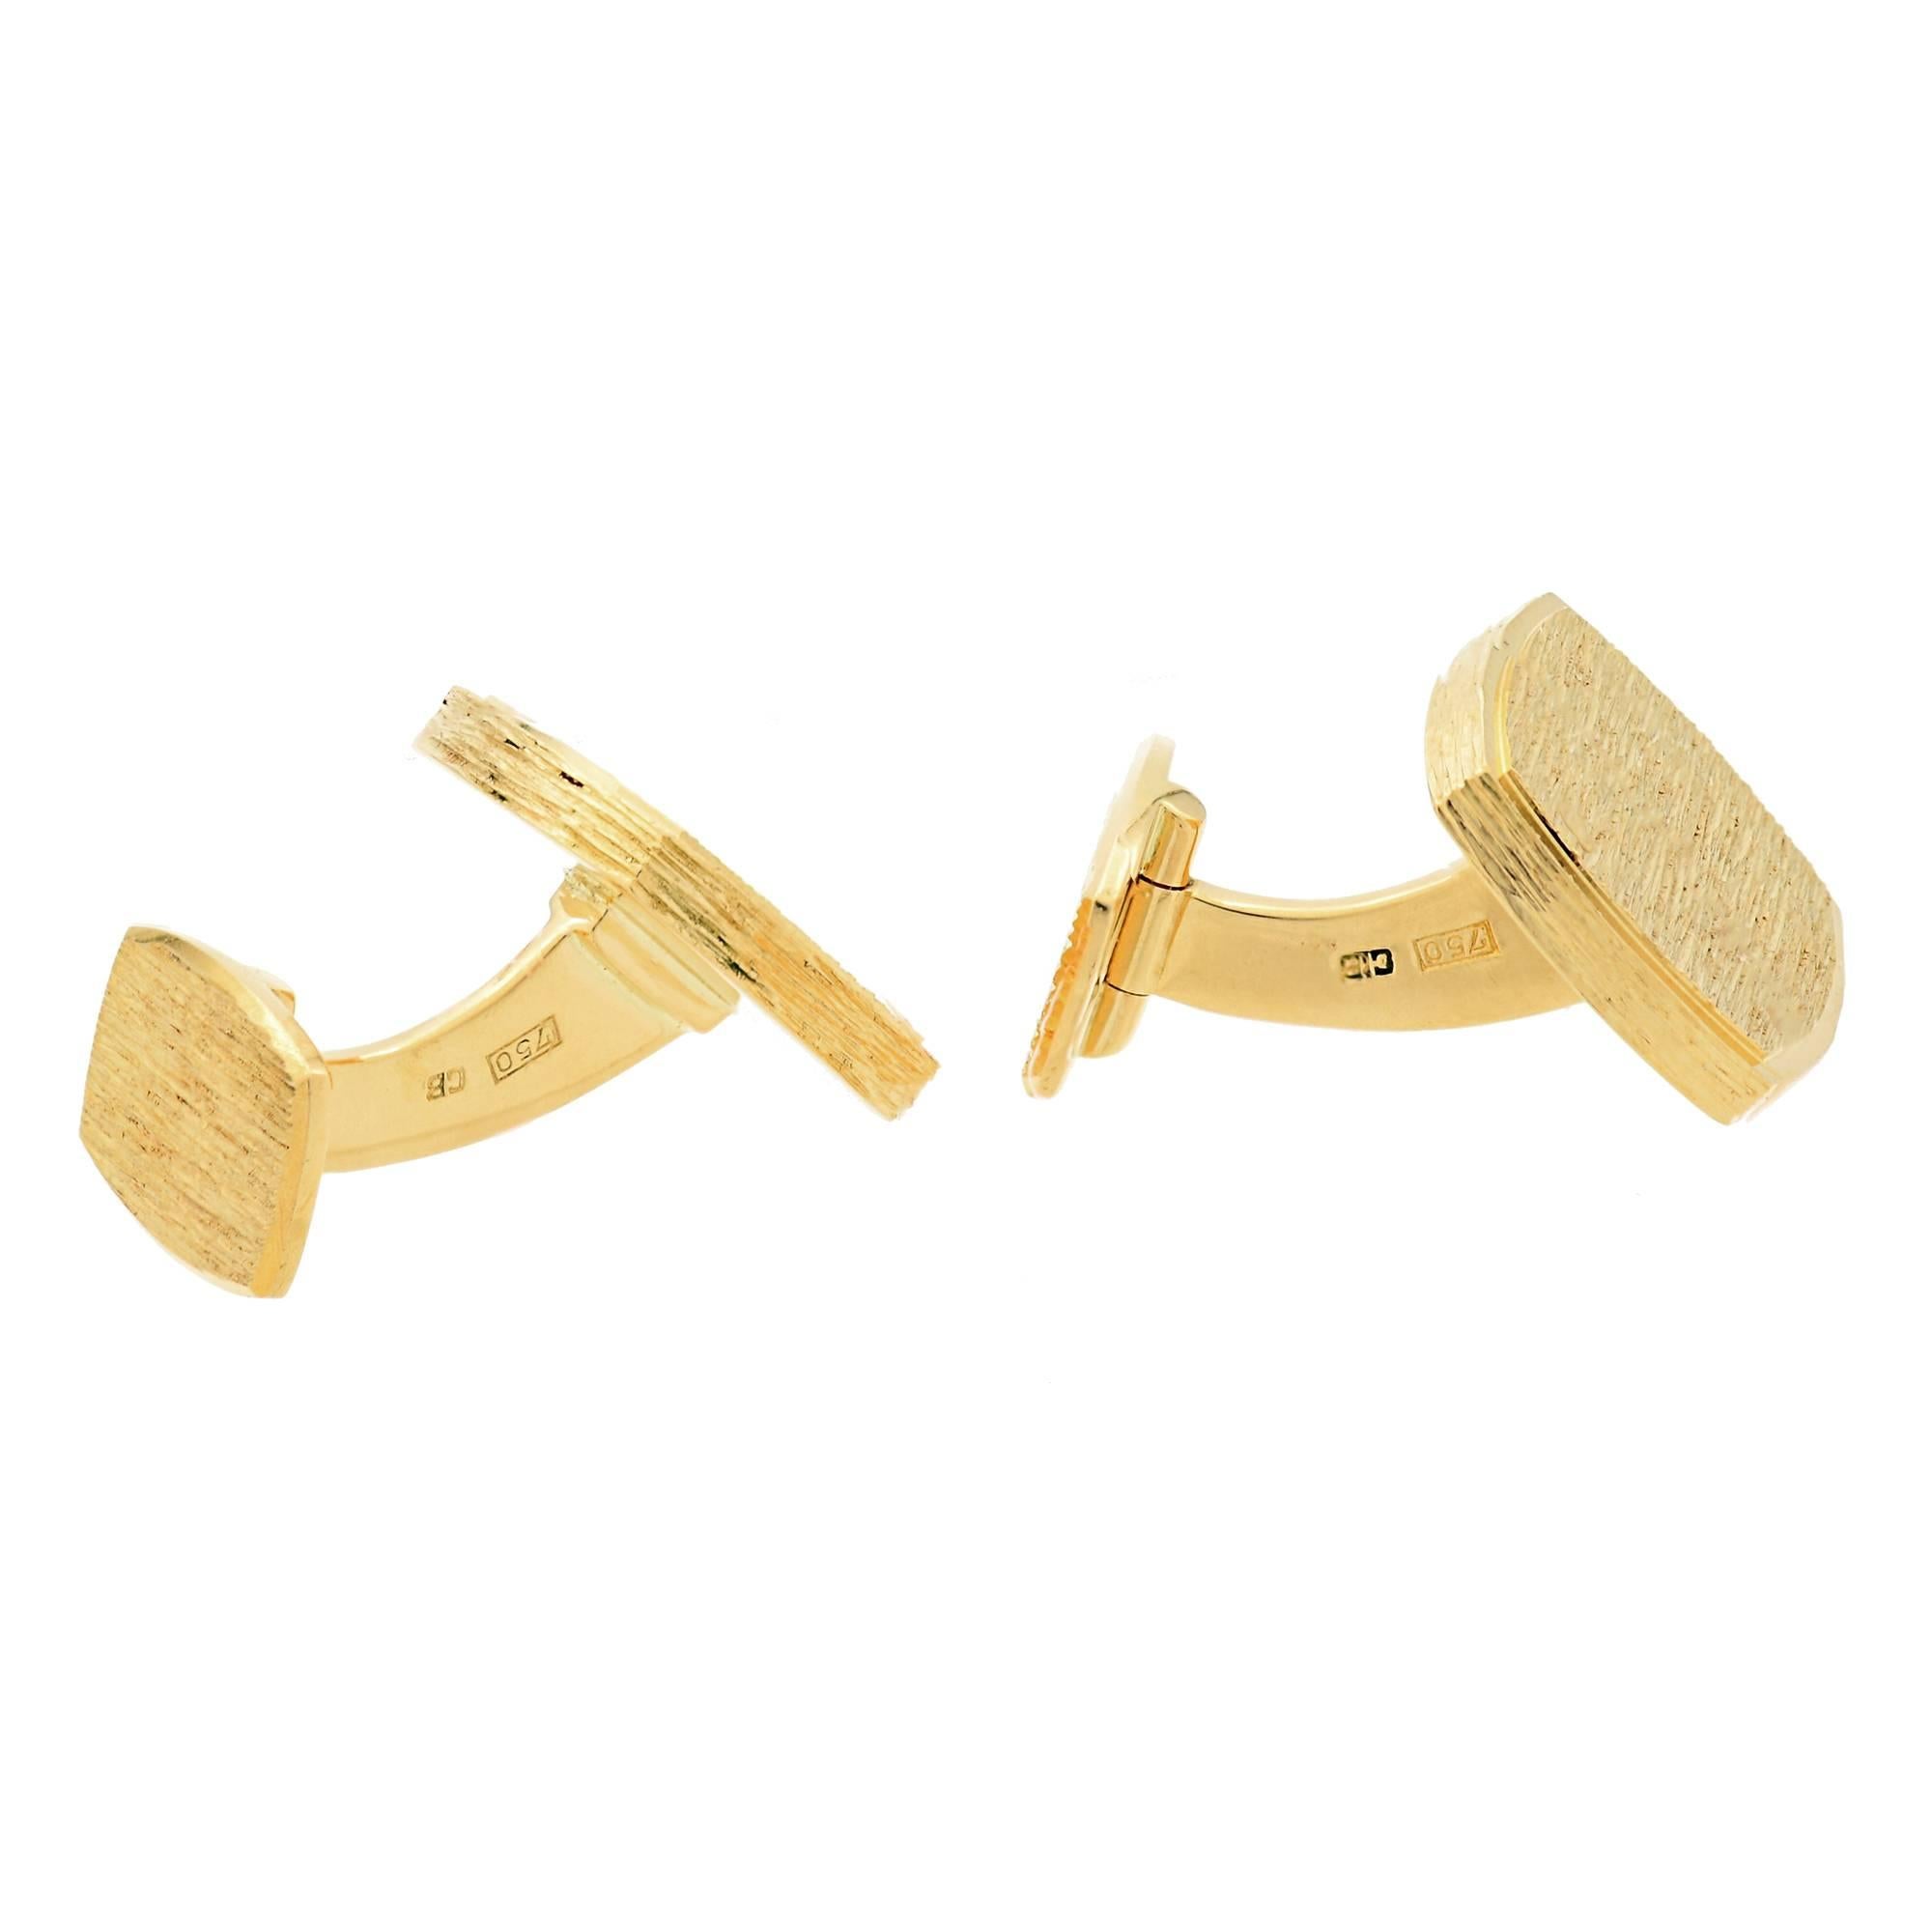 Vintage heavy 18k yellow gold double sided clip back cufflinks. Thick textured fronts.

18k yellow gold
Tested: 18k
Stamped: 750
Hallmark: CB
27.7 grams
Top to bottom: 16.42mm or .65 inch
Width: 16.42mm or .65 inch
Depth: 4.42mm

